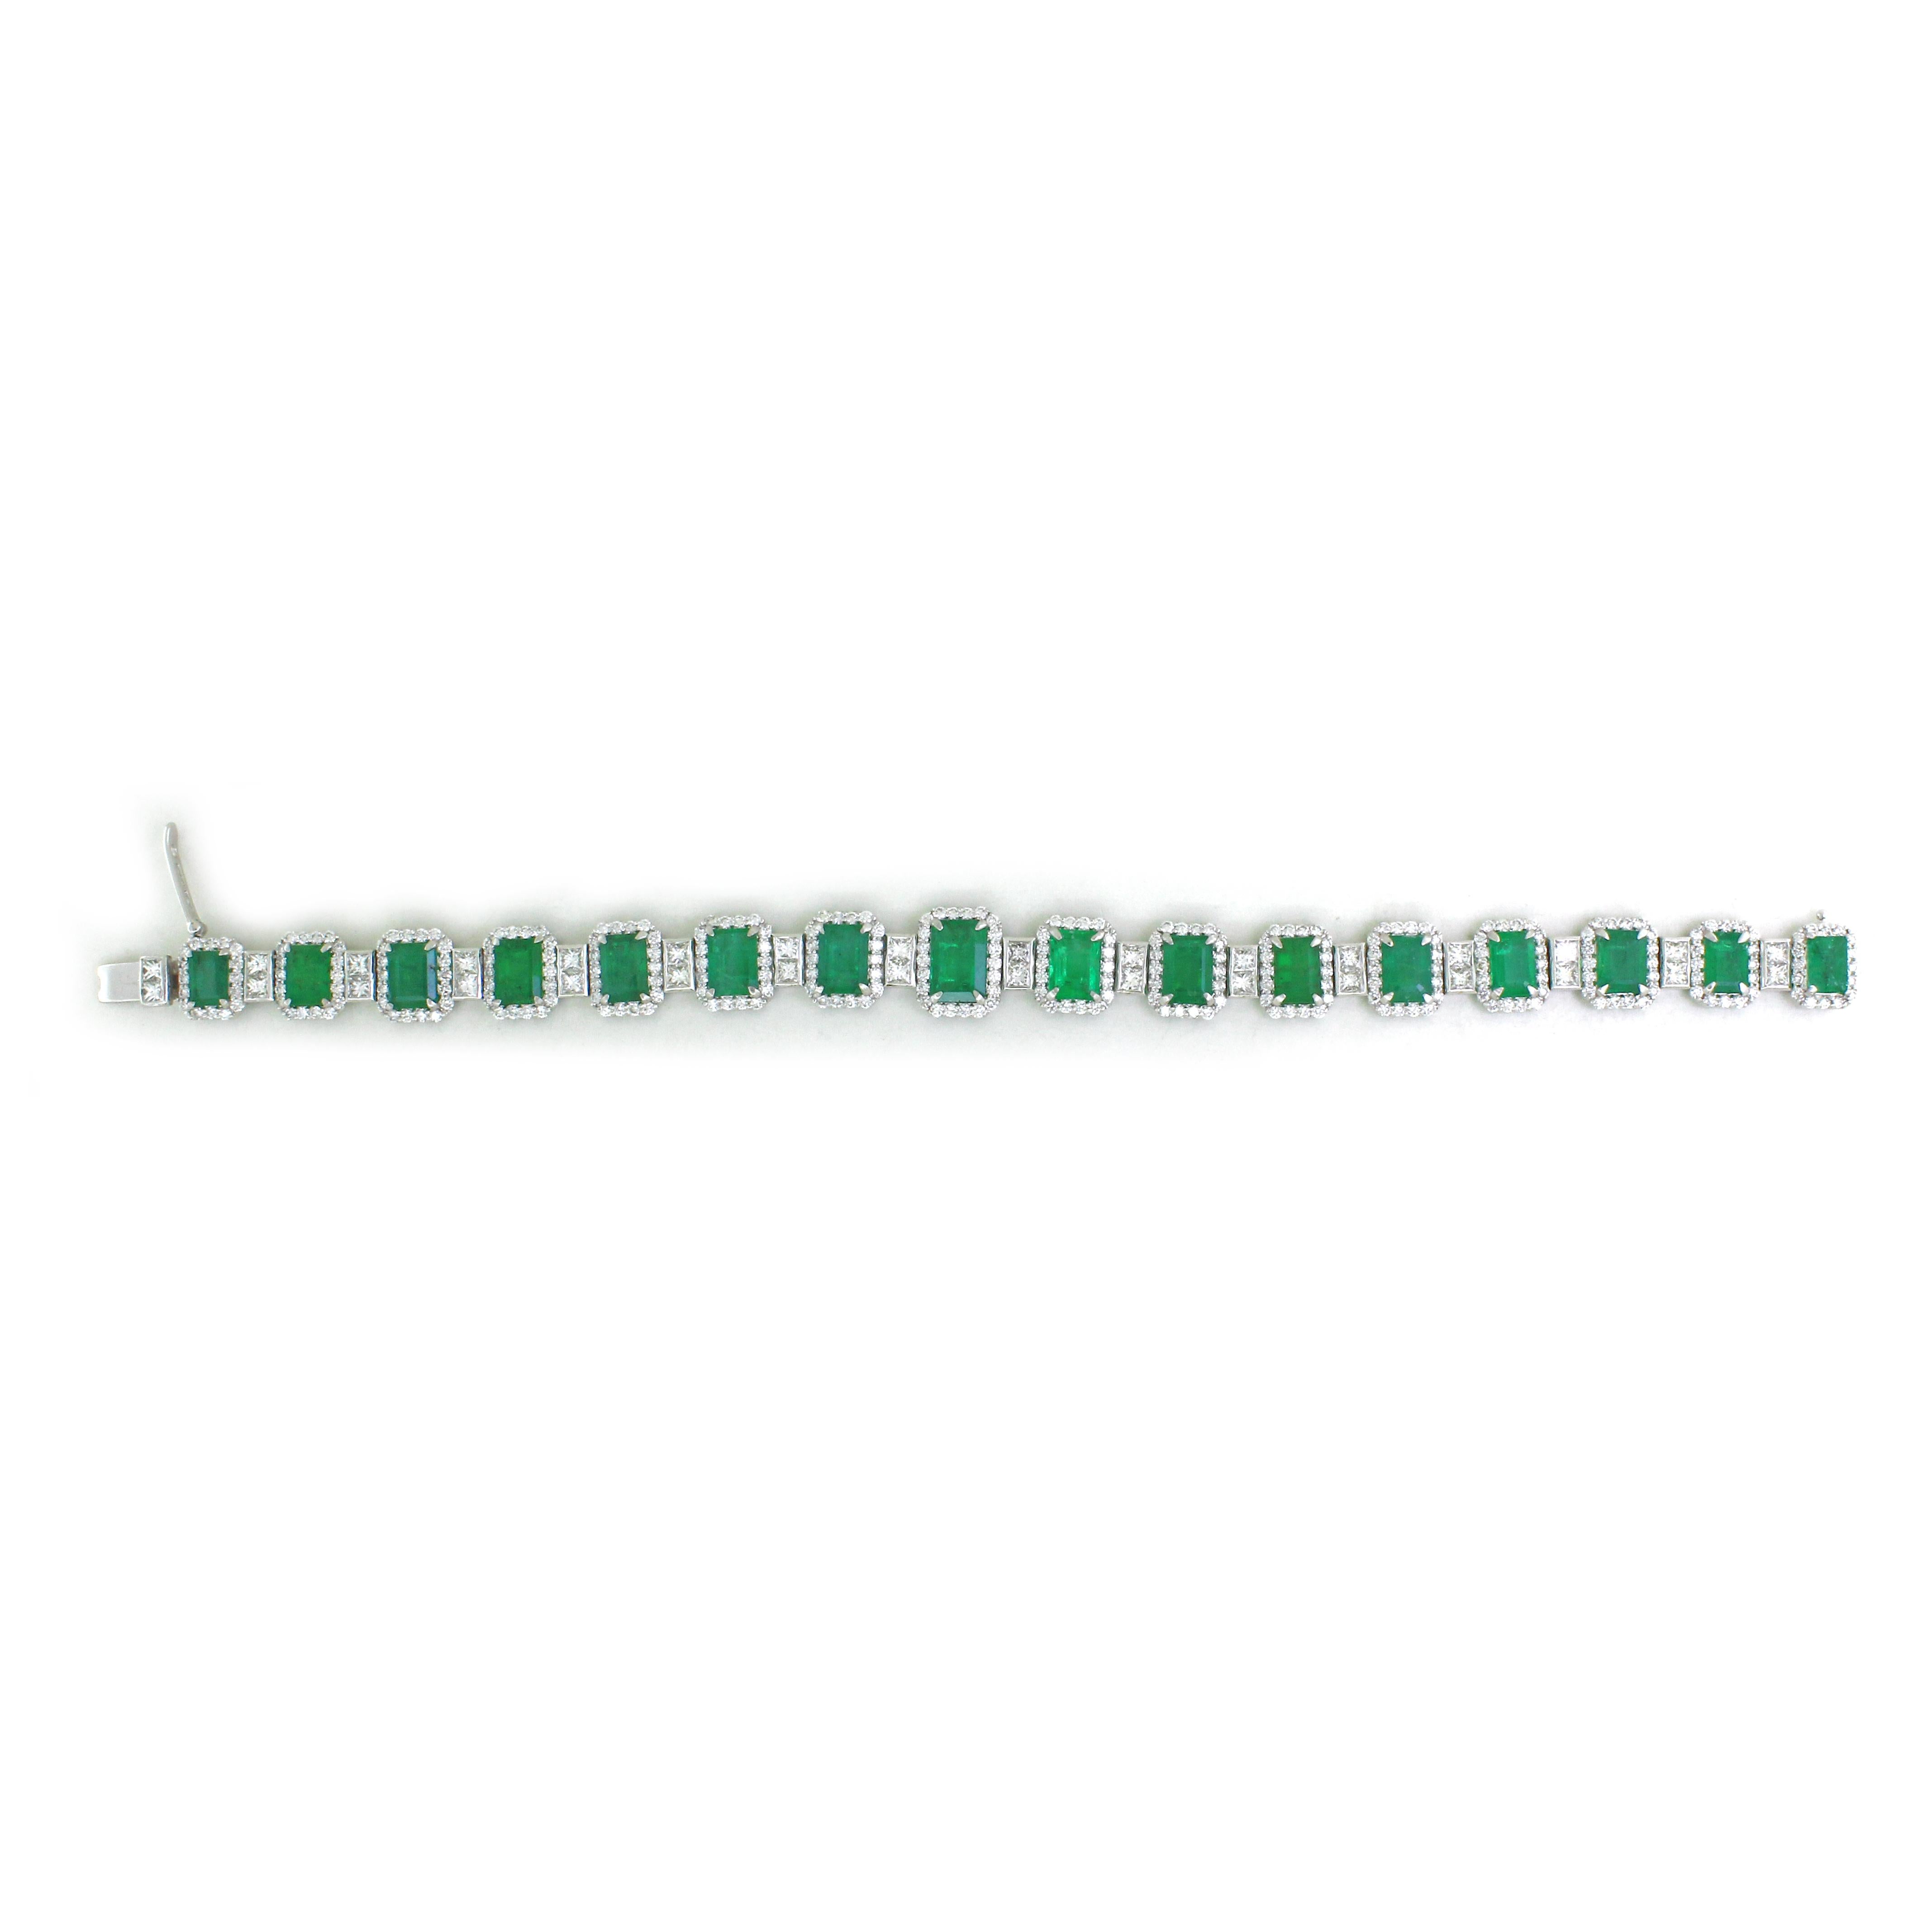 Exuding timeless elegance, this 18K white gold bracelet is a true work of art. It boasts 16 mesmerizing emerald-cut emeralds, totaling a remarkable 14.85 carats, each meticulously cradled in secure 4-prong settings. The lush green of the emeralds